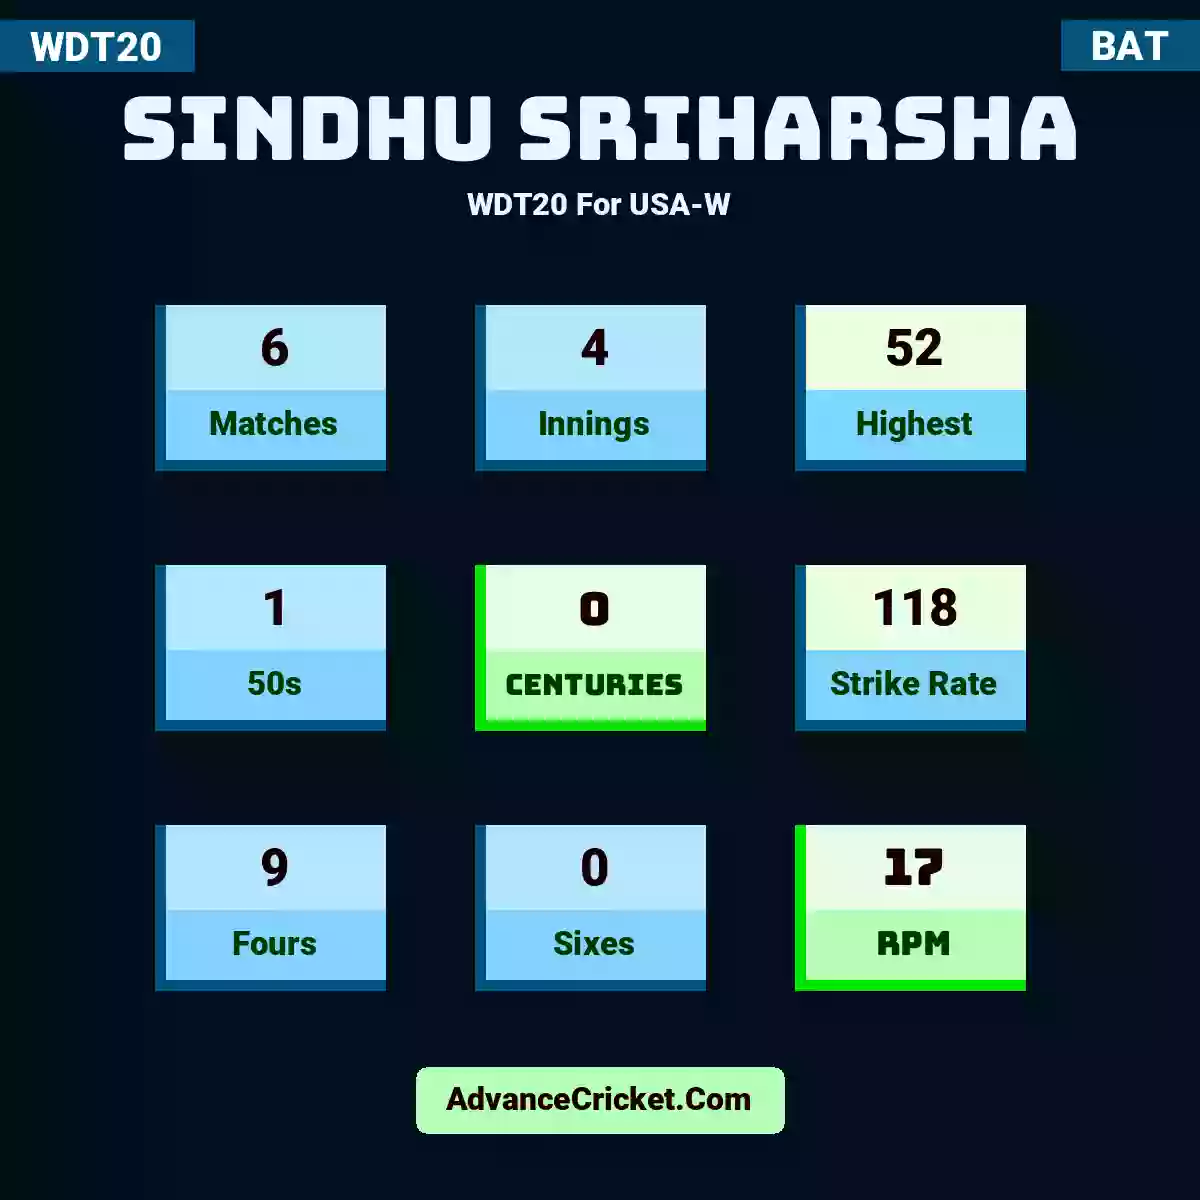 Sindhu Sriharsha WDT20  For USA-W, Sindhu Sriharsha played 6 matches, scored 52 runs as highest, 1 half-centuries, and 0 centuries, with a strike rate of 118. S.Sriharsha hit 9 fours and 0 sixes, with an RPM of 17.